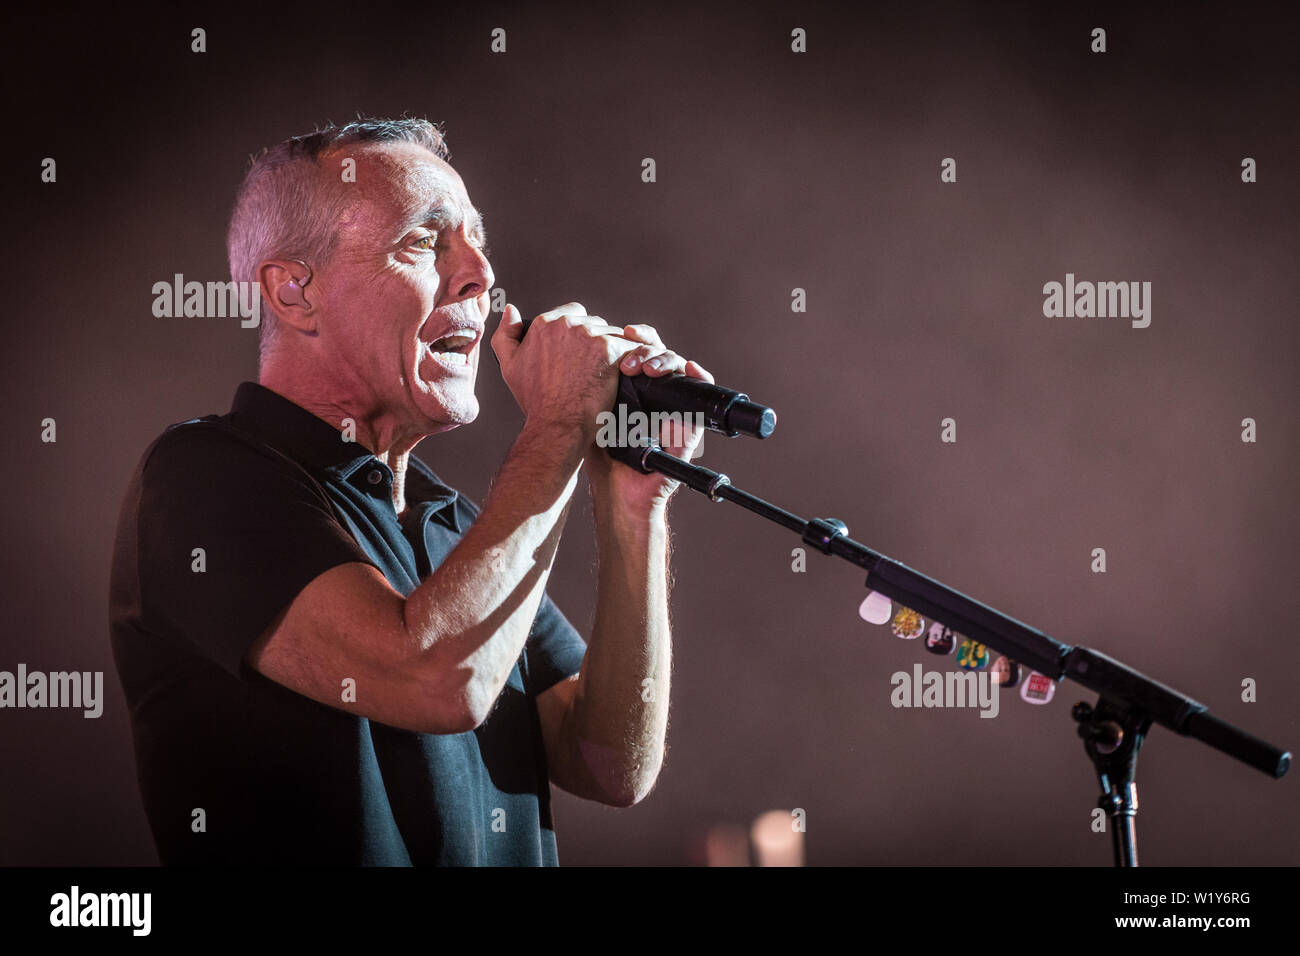 Roskilde, Denmark. July 03rd, 2019. The English pop rock band Tears For Fears performs a live concert during the Danish music festival Roskilde Festival 2019. Here singer and musician Curt Smith is seen live on stage. (Photo credit: Gonzales Photo - Thomas Rasmussen). Stock Photo